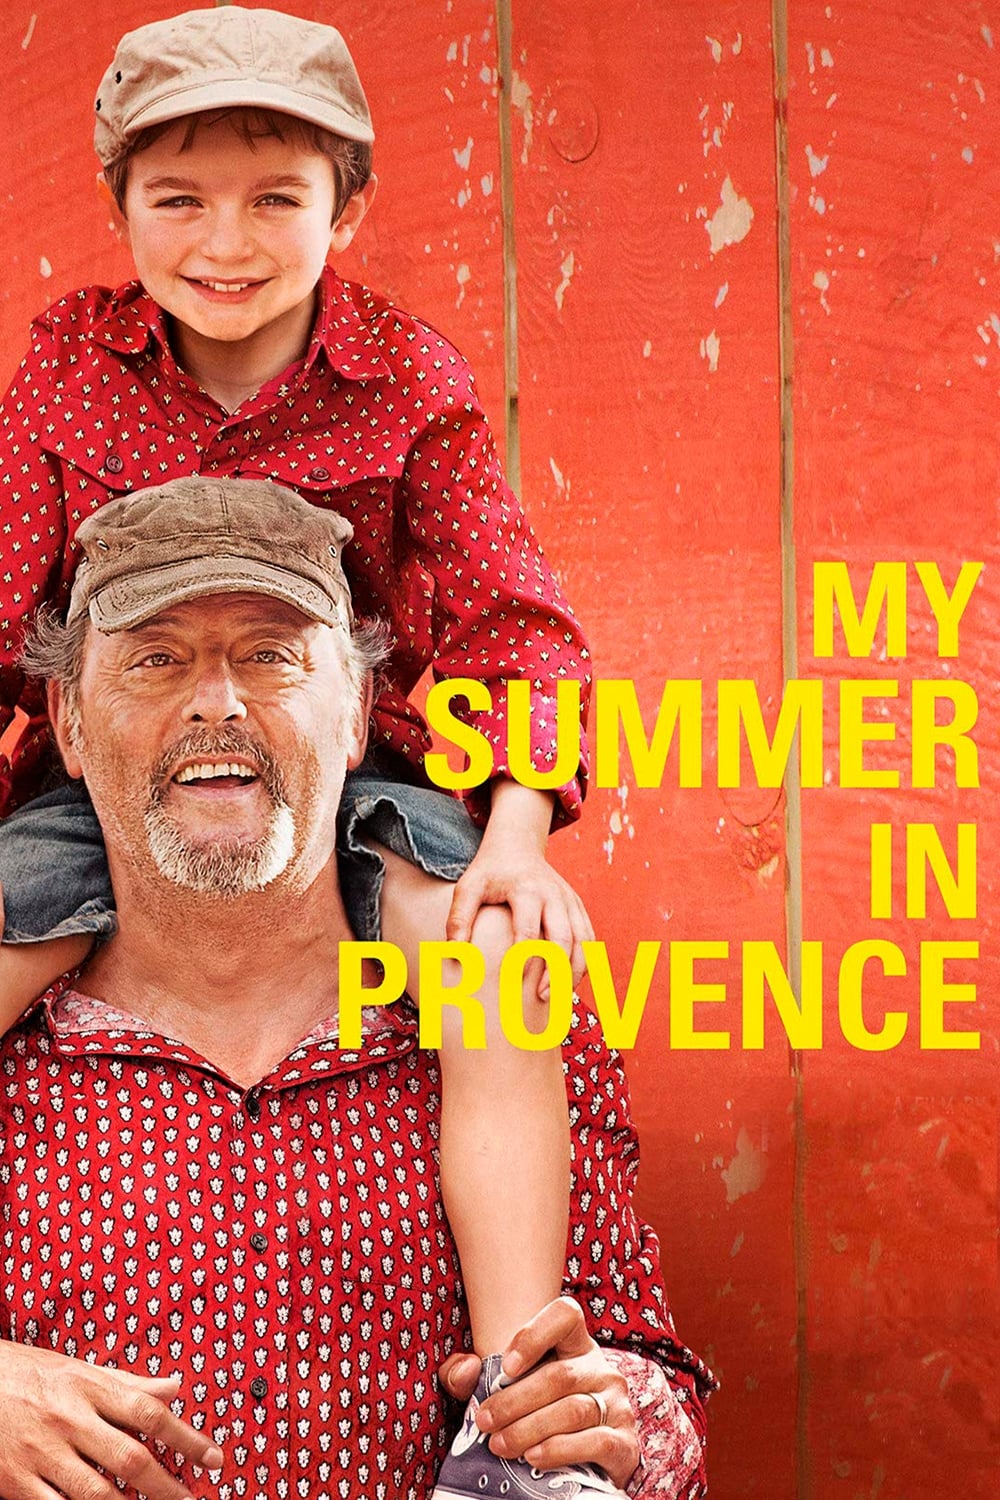 Our Summer in Provence (2014)